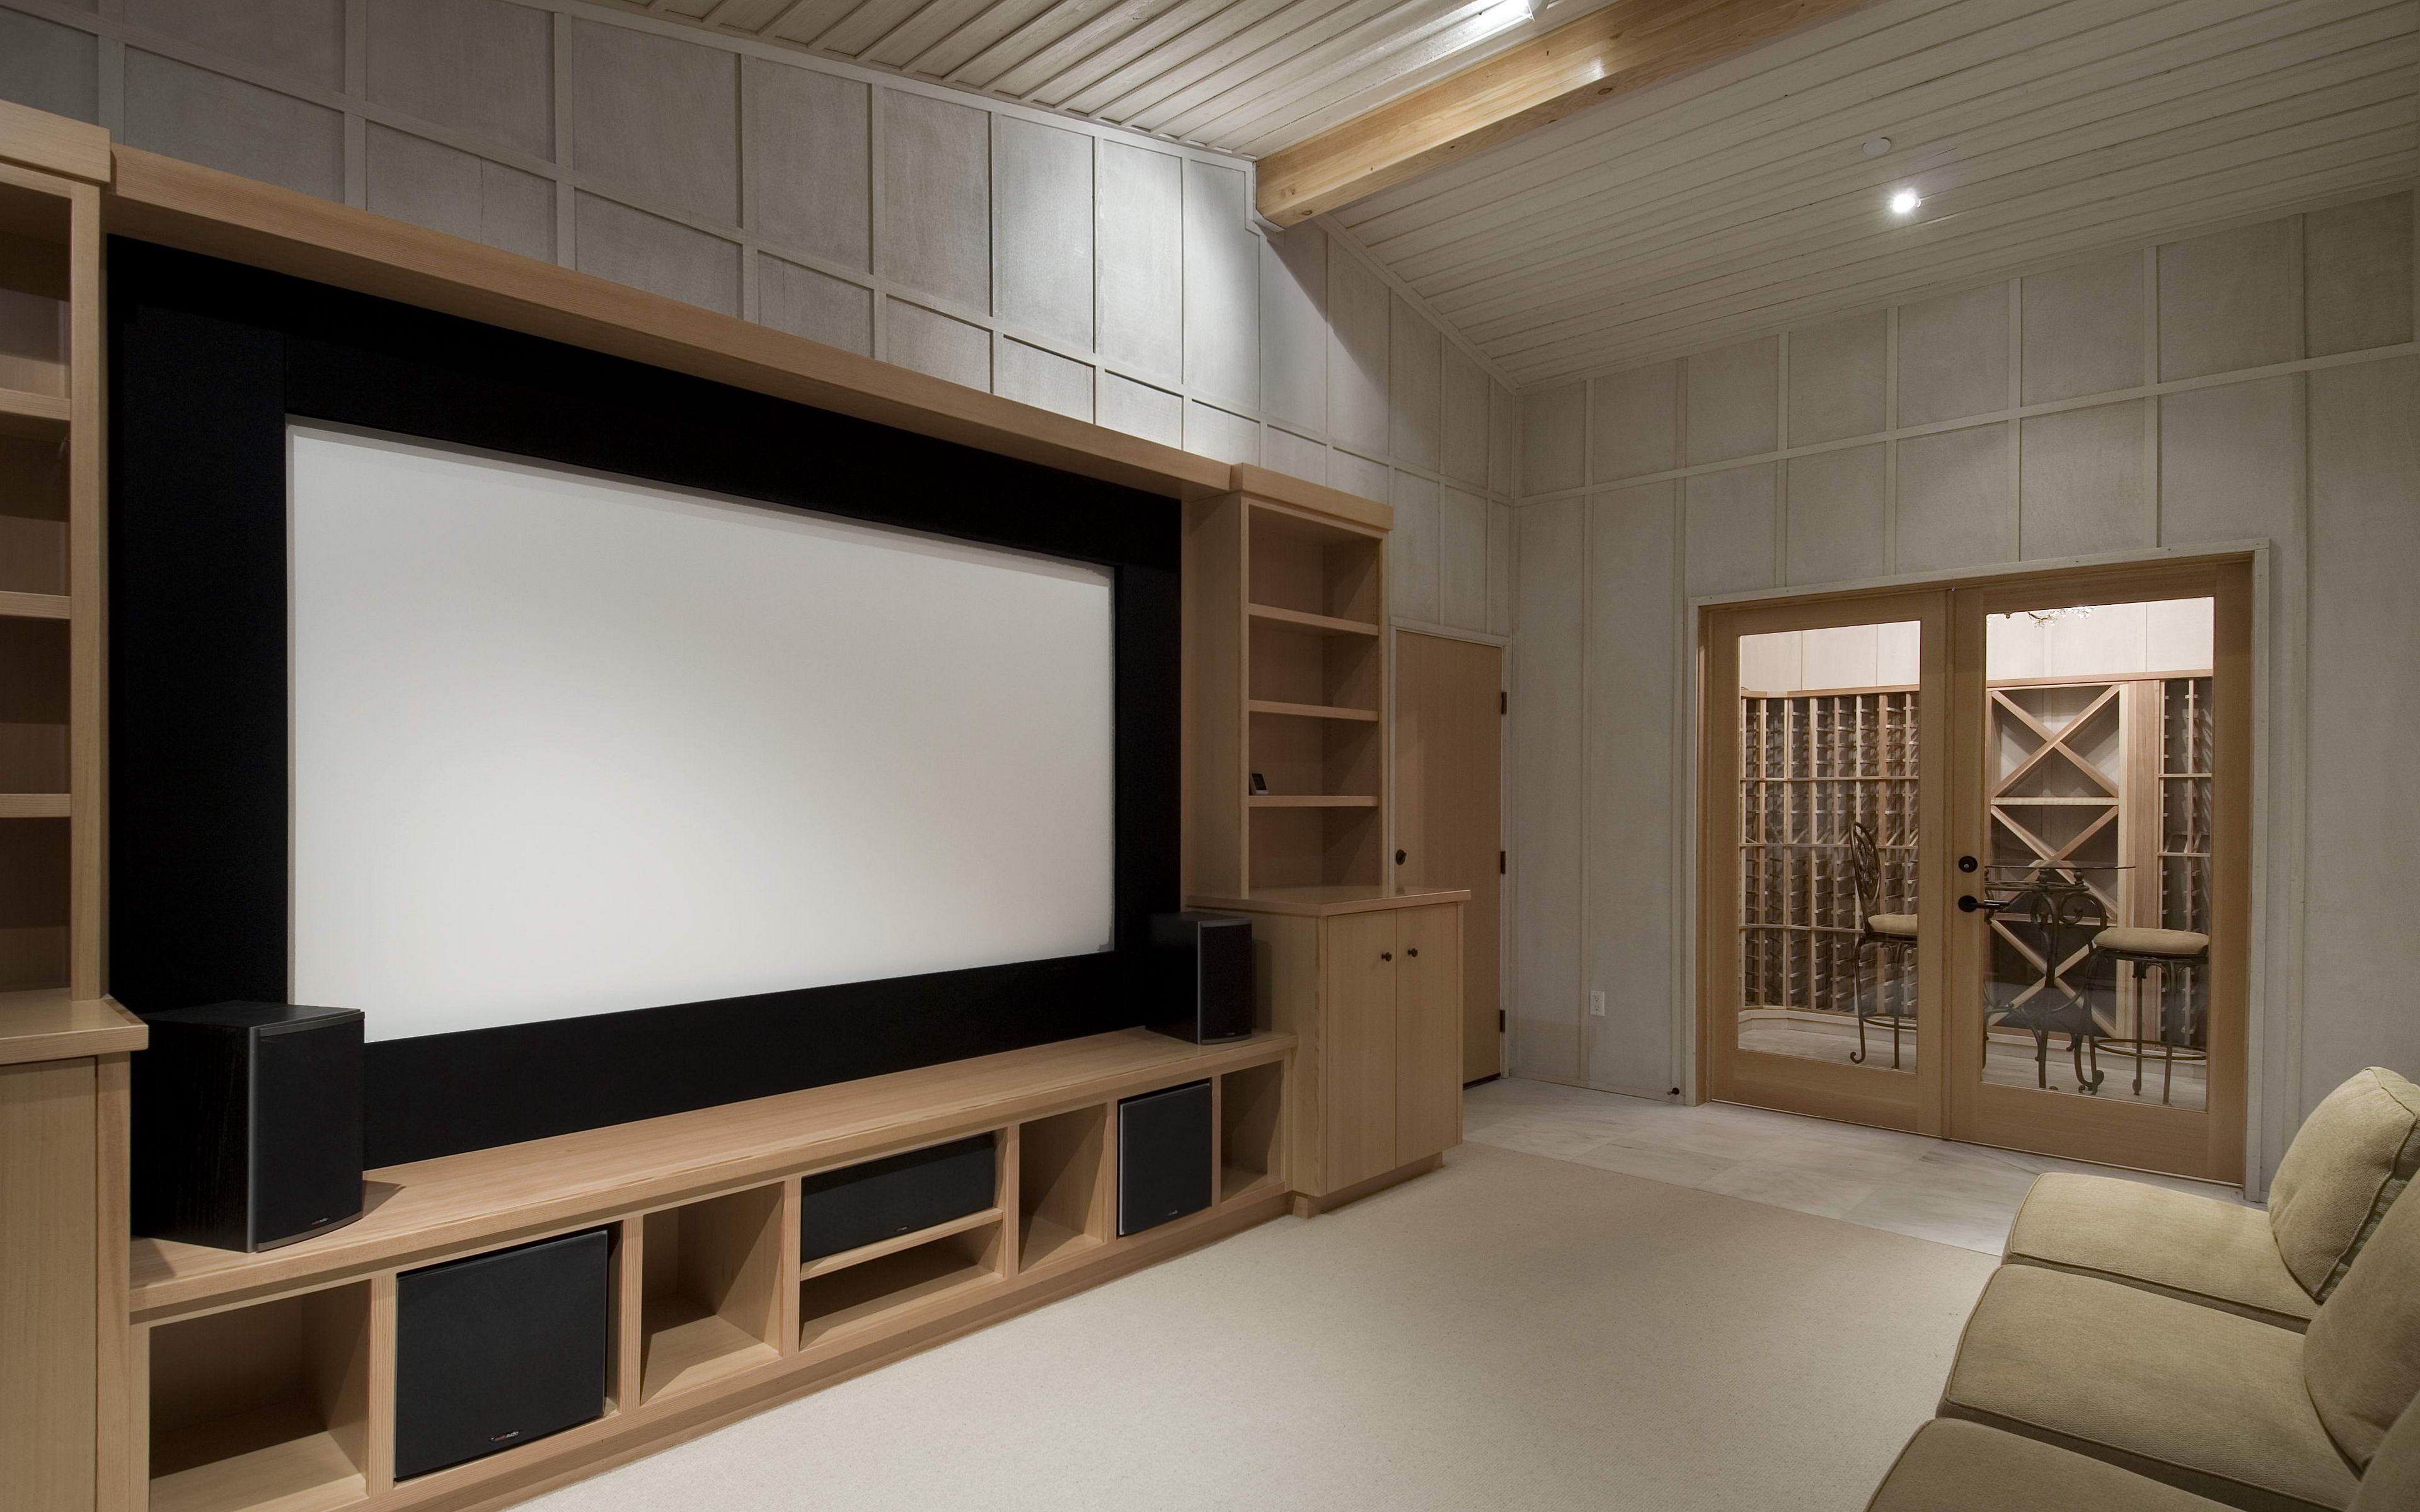 Home Theater Wiring: How to Wire Your AV System | Home Cinema Guide